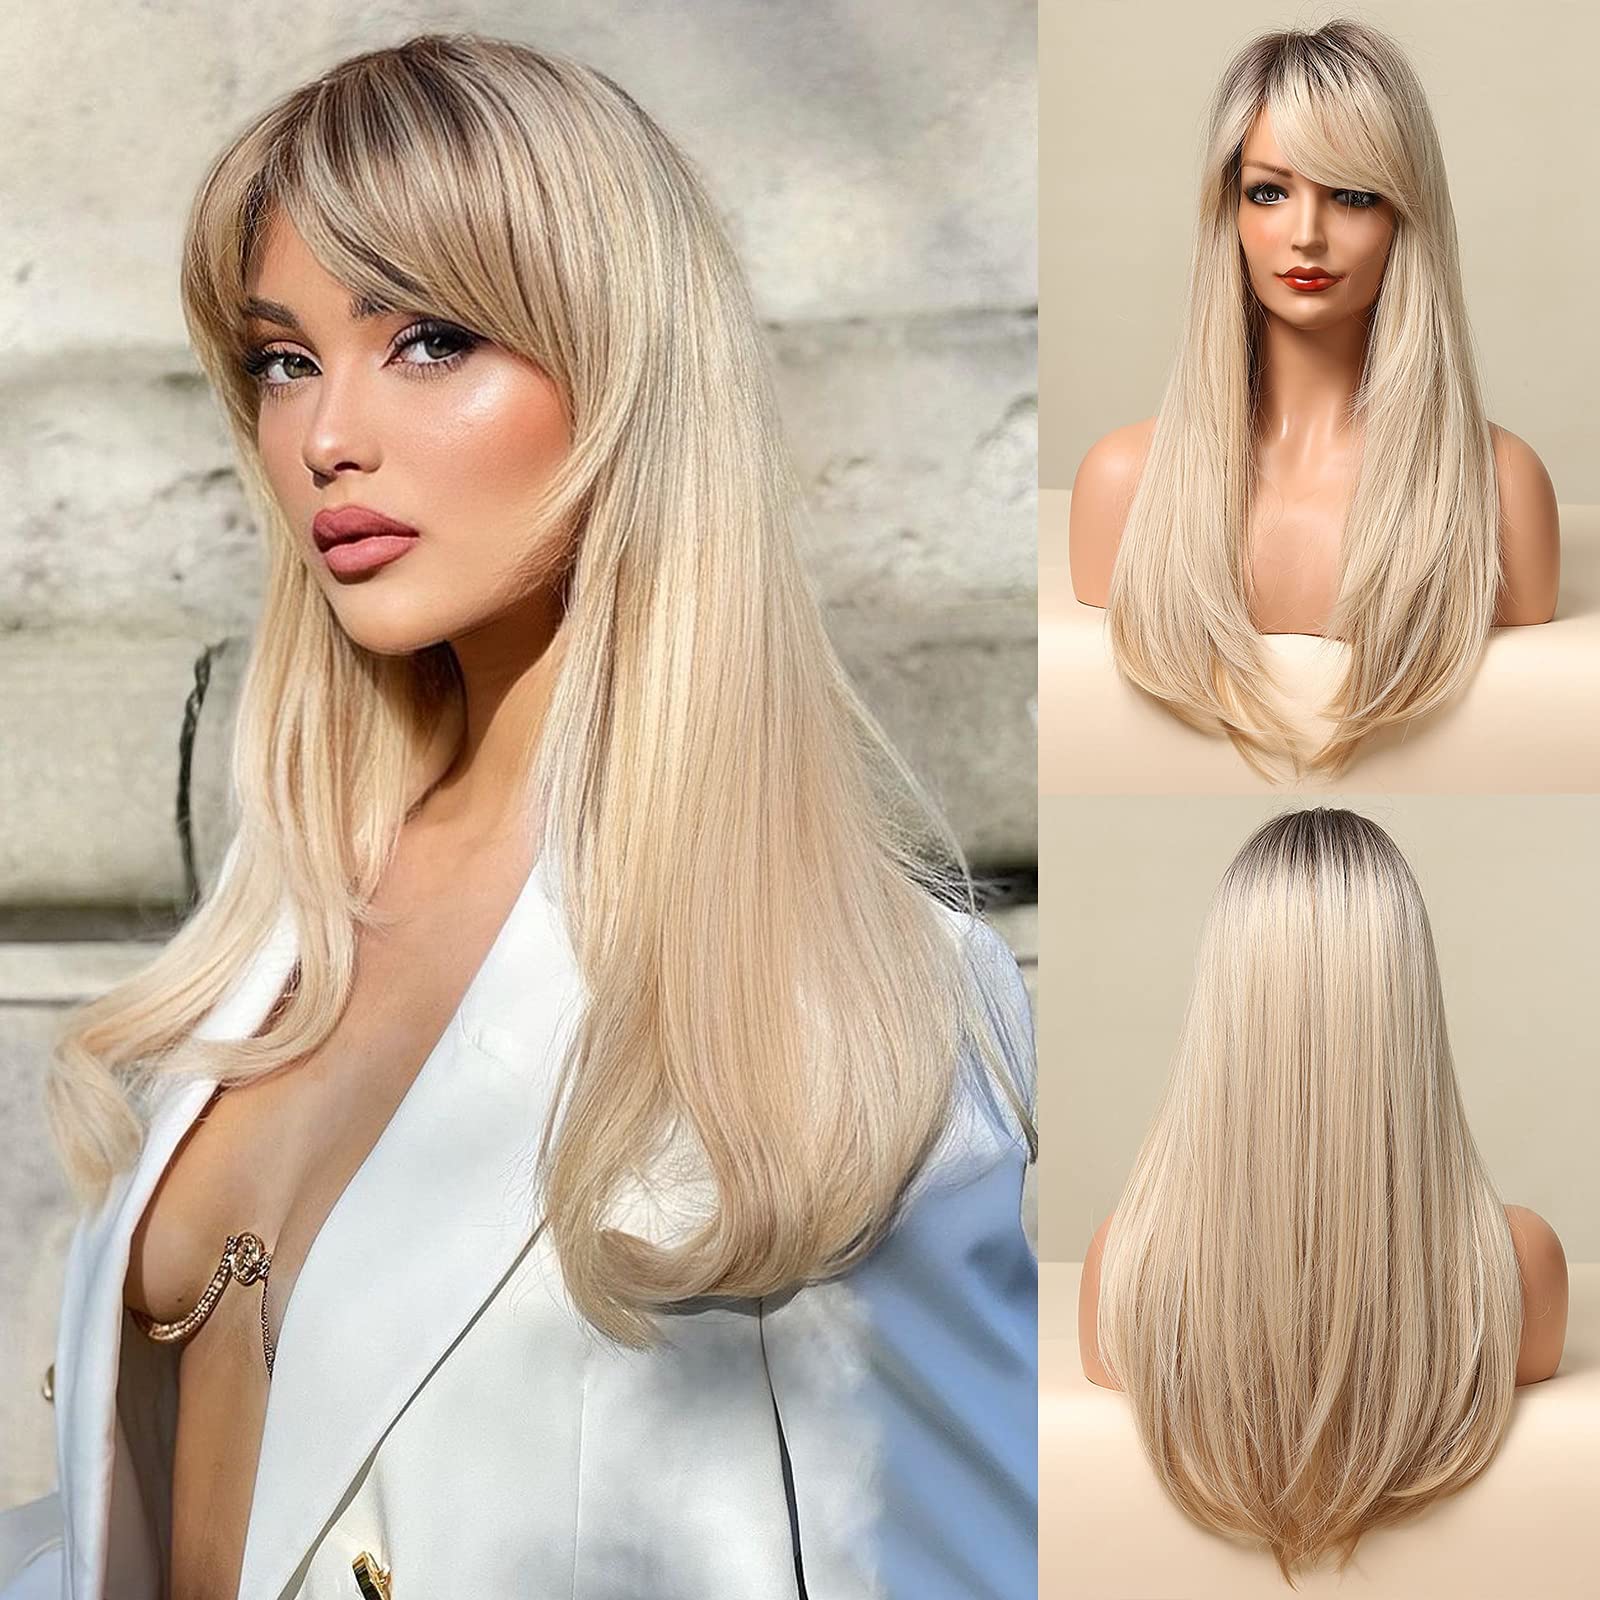 Honygebia Long Blonde Wig with Bangs - Ombre Dark Root Blonde Wigs for White Women, Striaght Wavy Synthetic Heat Resistant Hair,